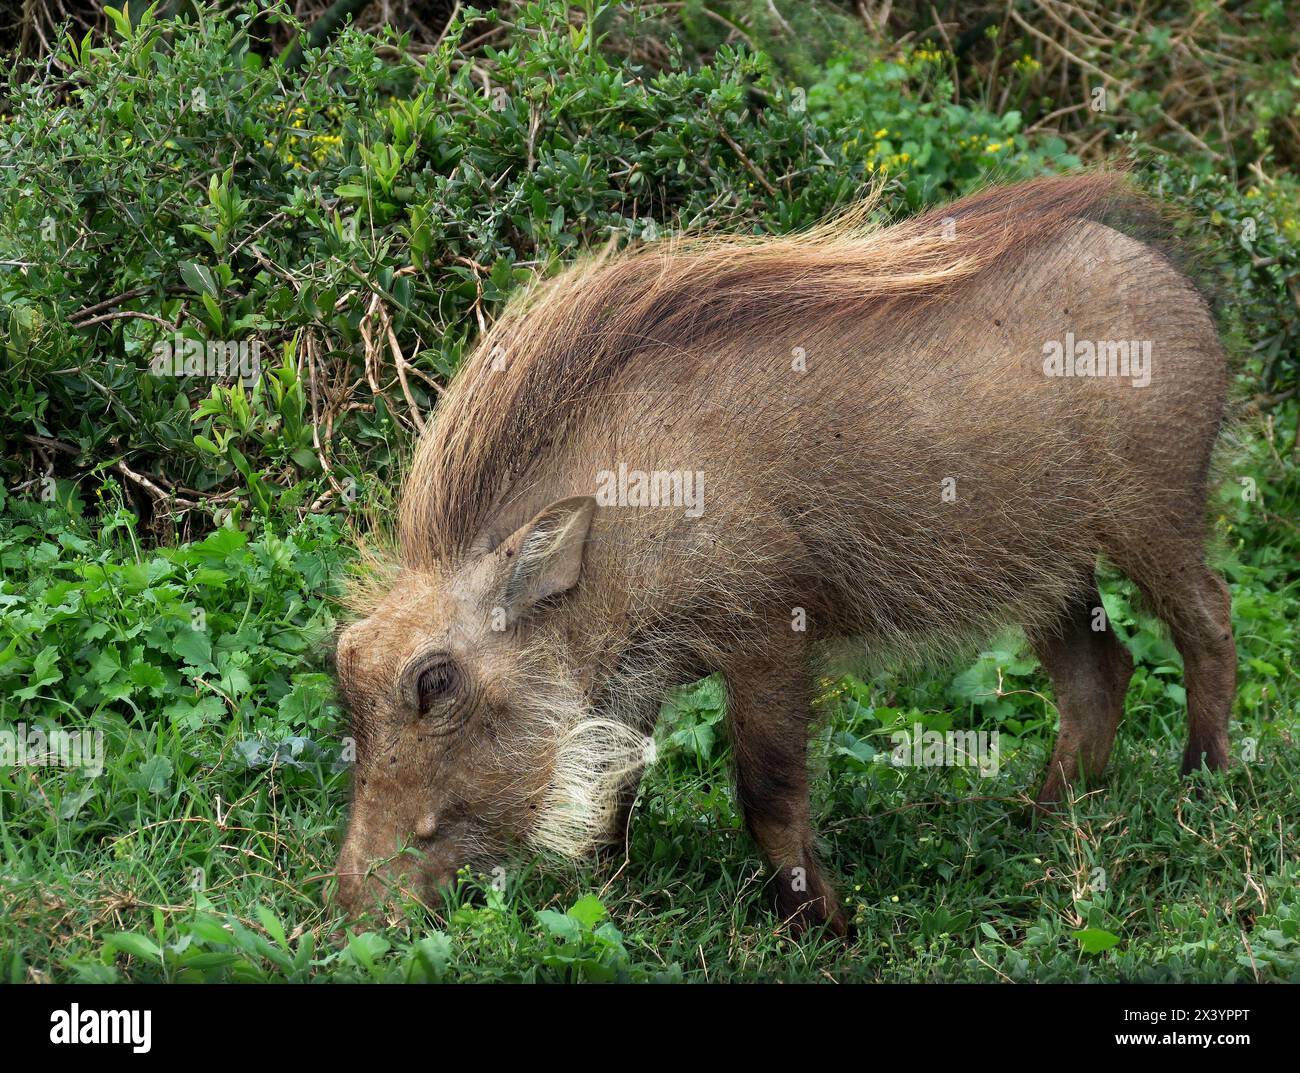 Bush Pig dell'Africa meridionale Foto Stock